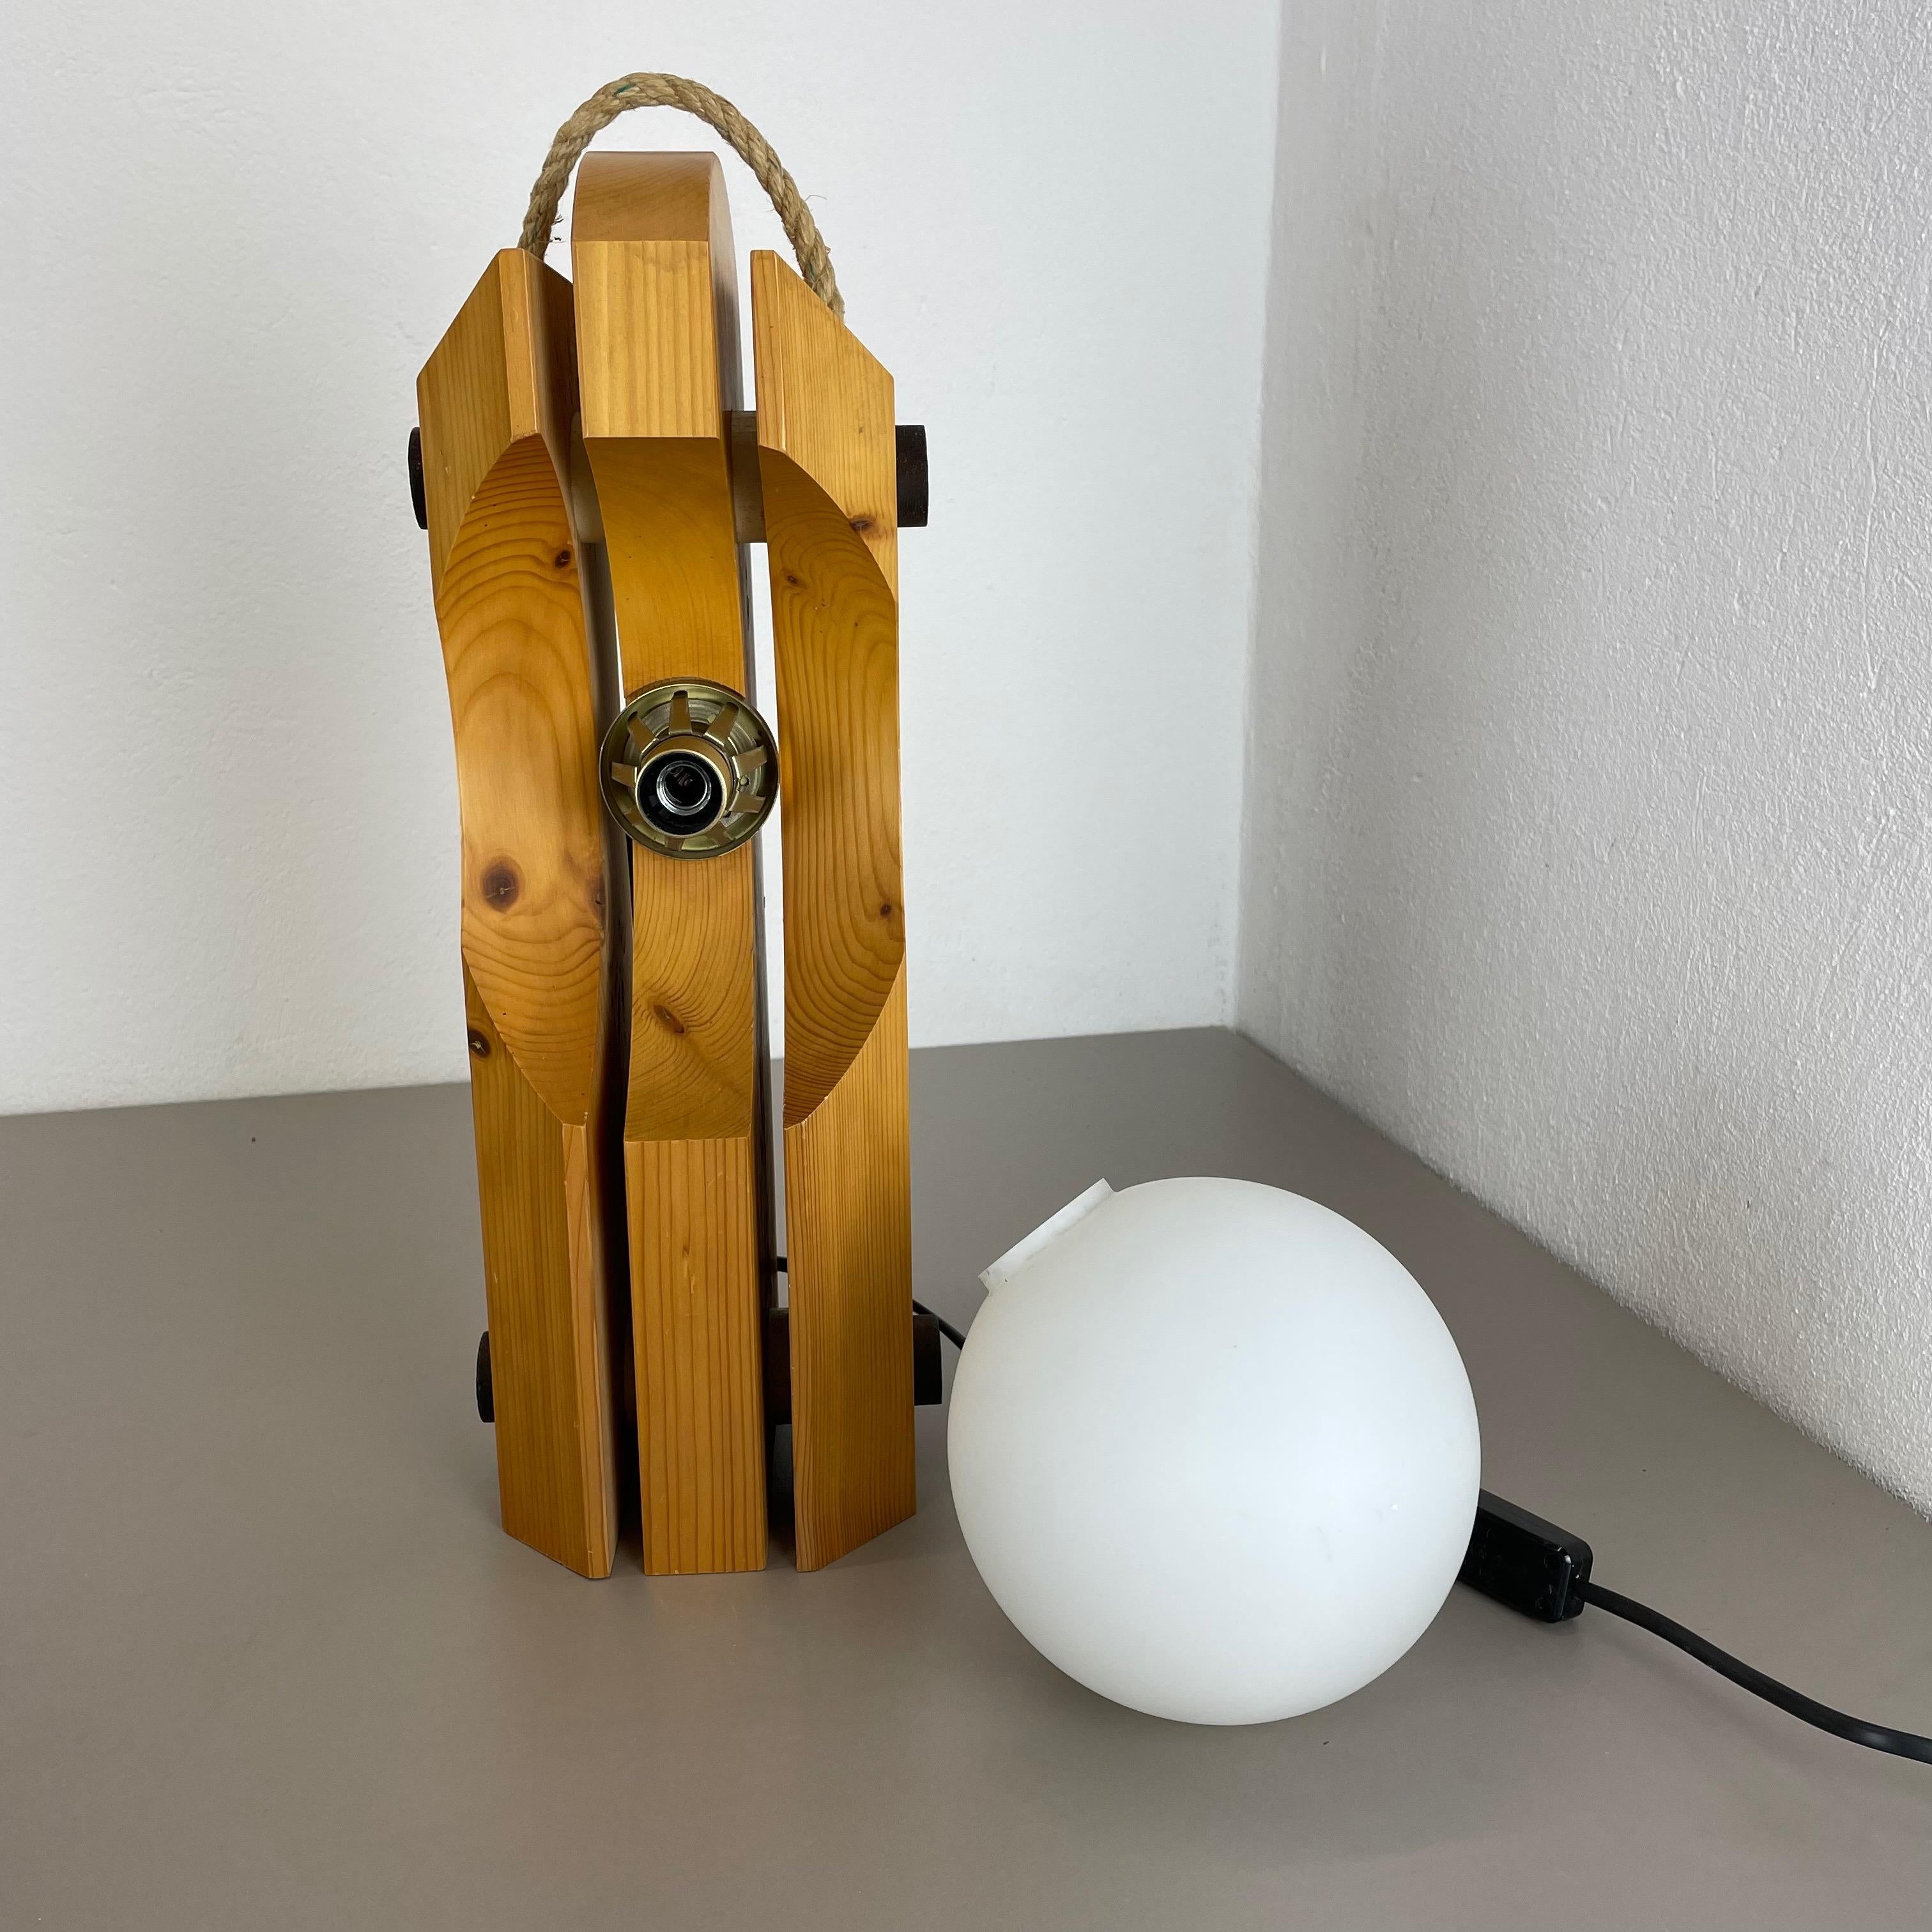 Large Organic Sculptural PINE Wooden Table Light by Temde Lights, Germany 1970s For Sale 13